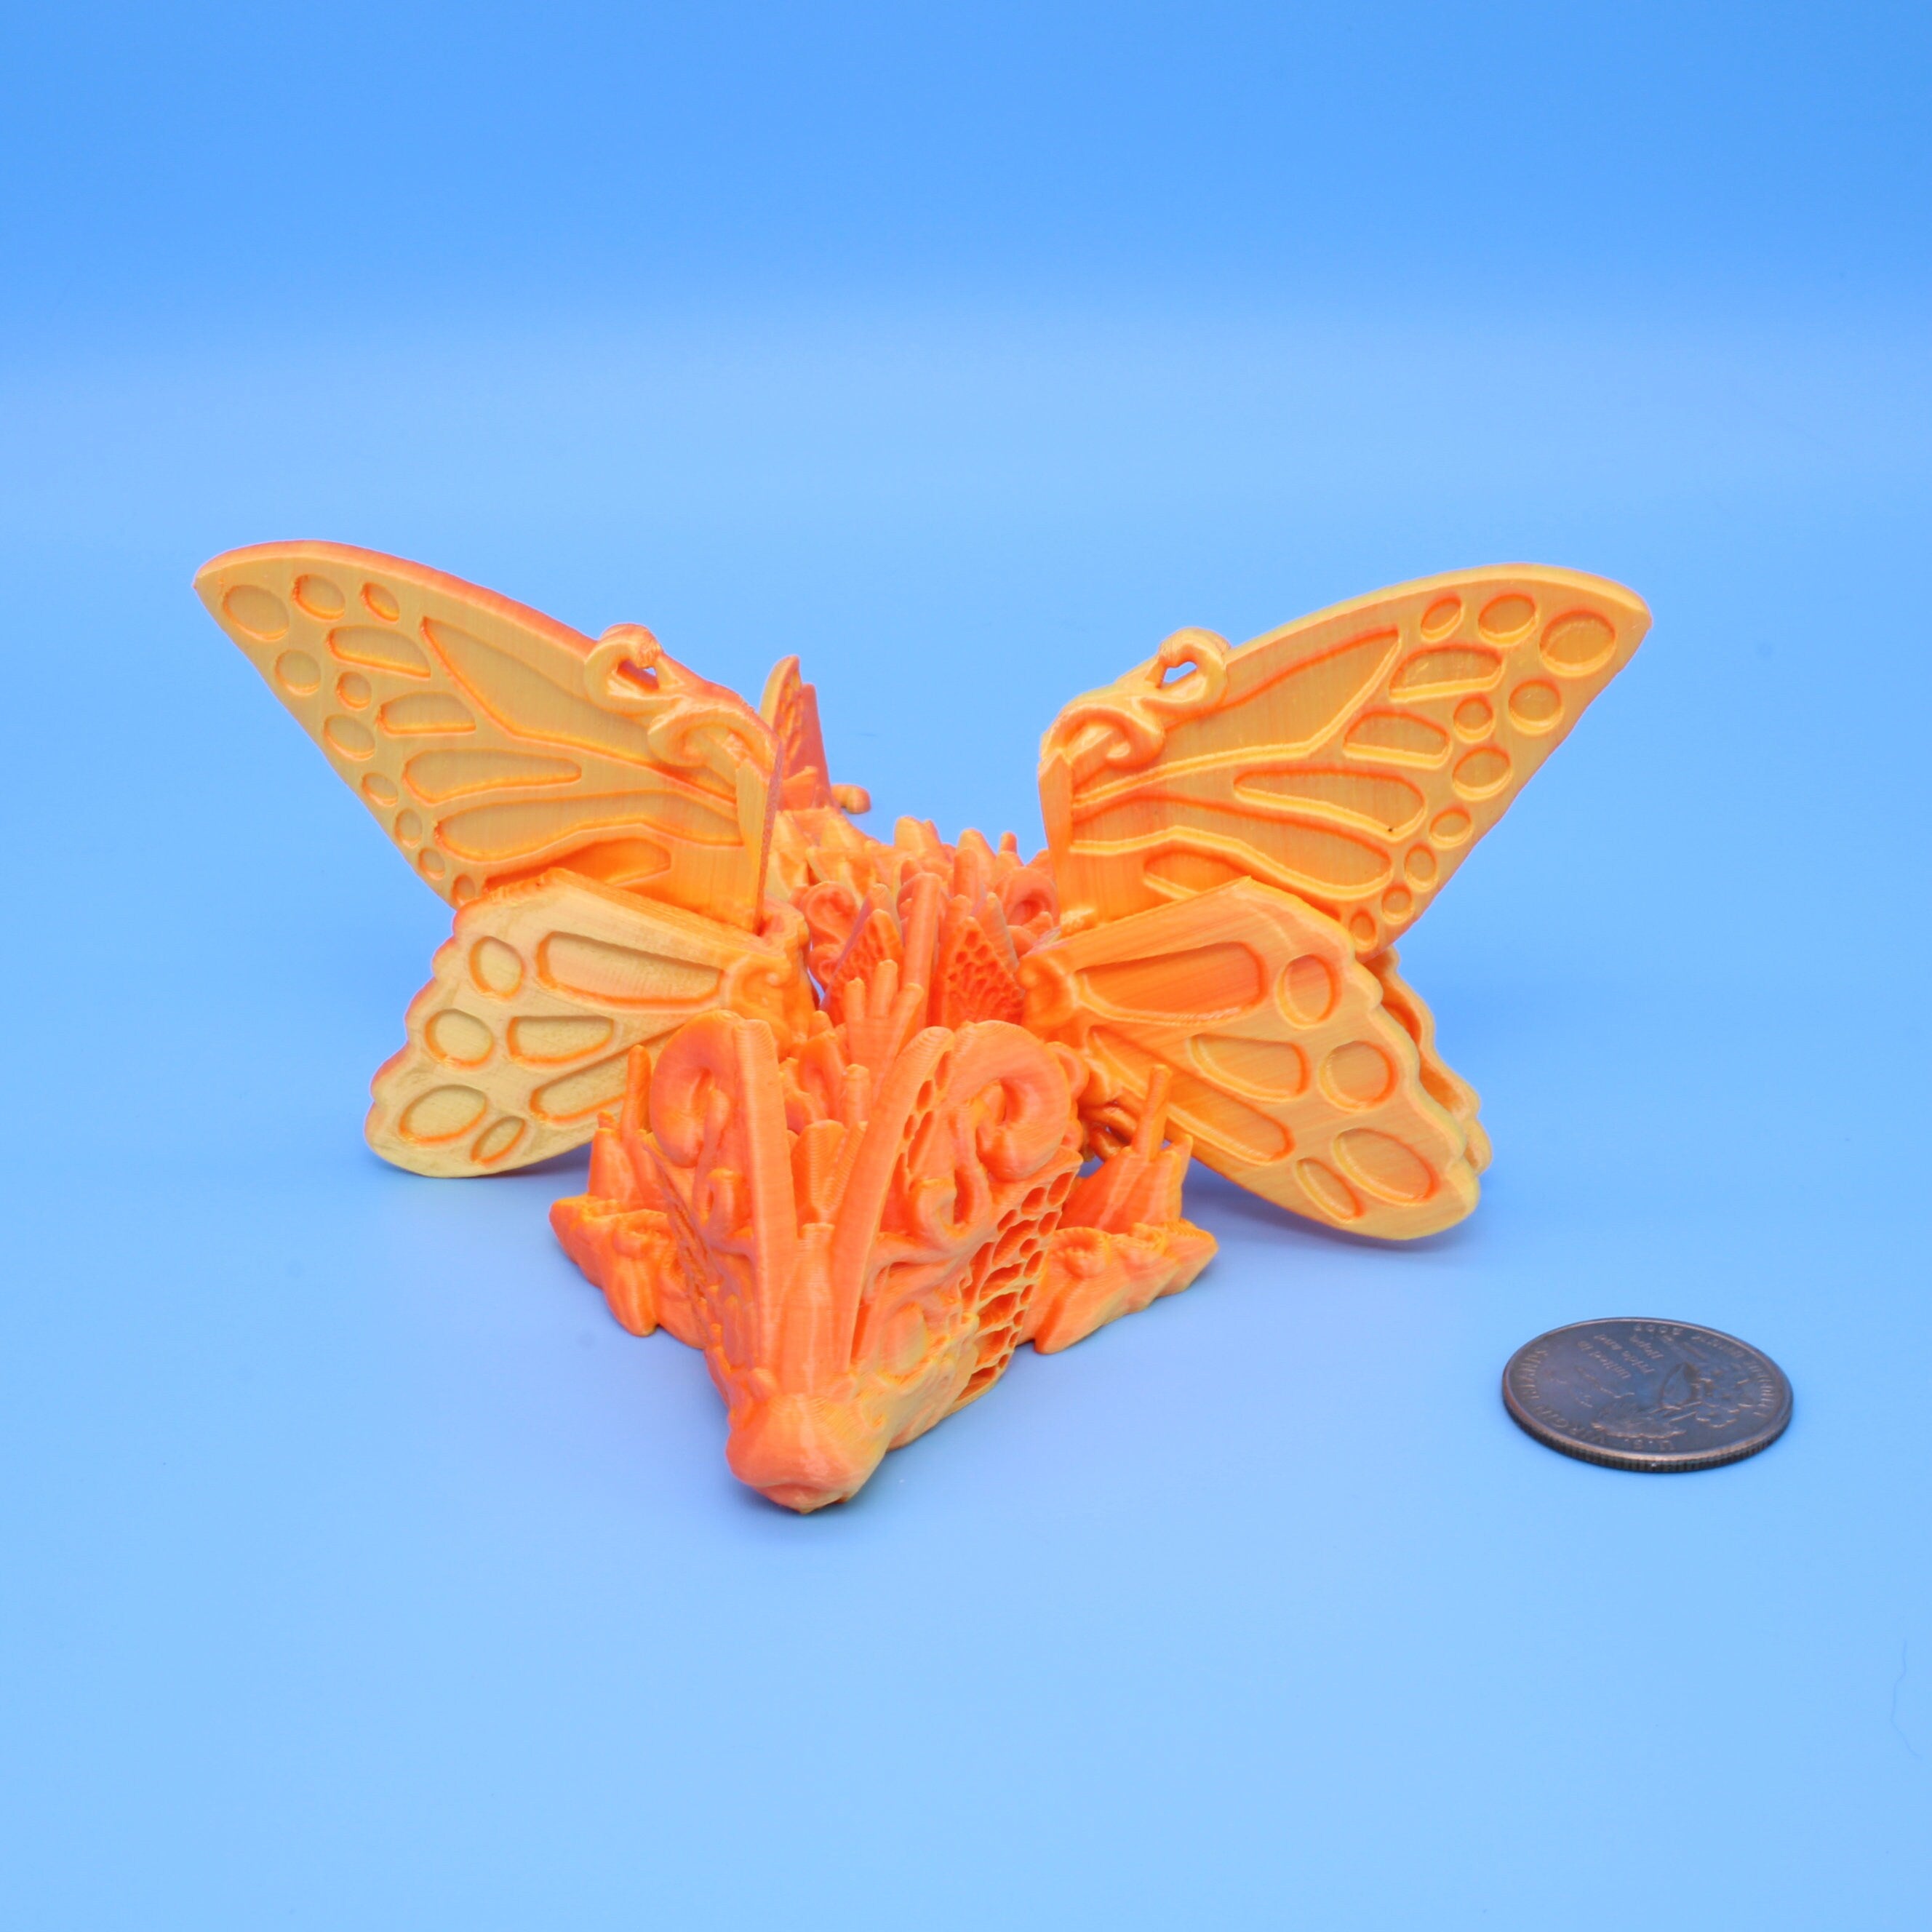 Butterfly Wing Dragon | 3D Printed, 7.5 in.